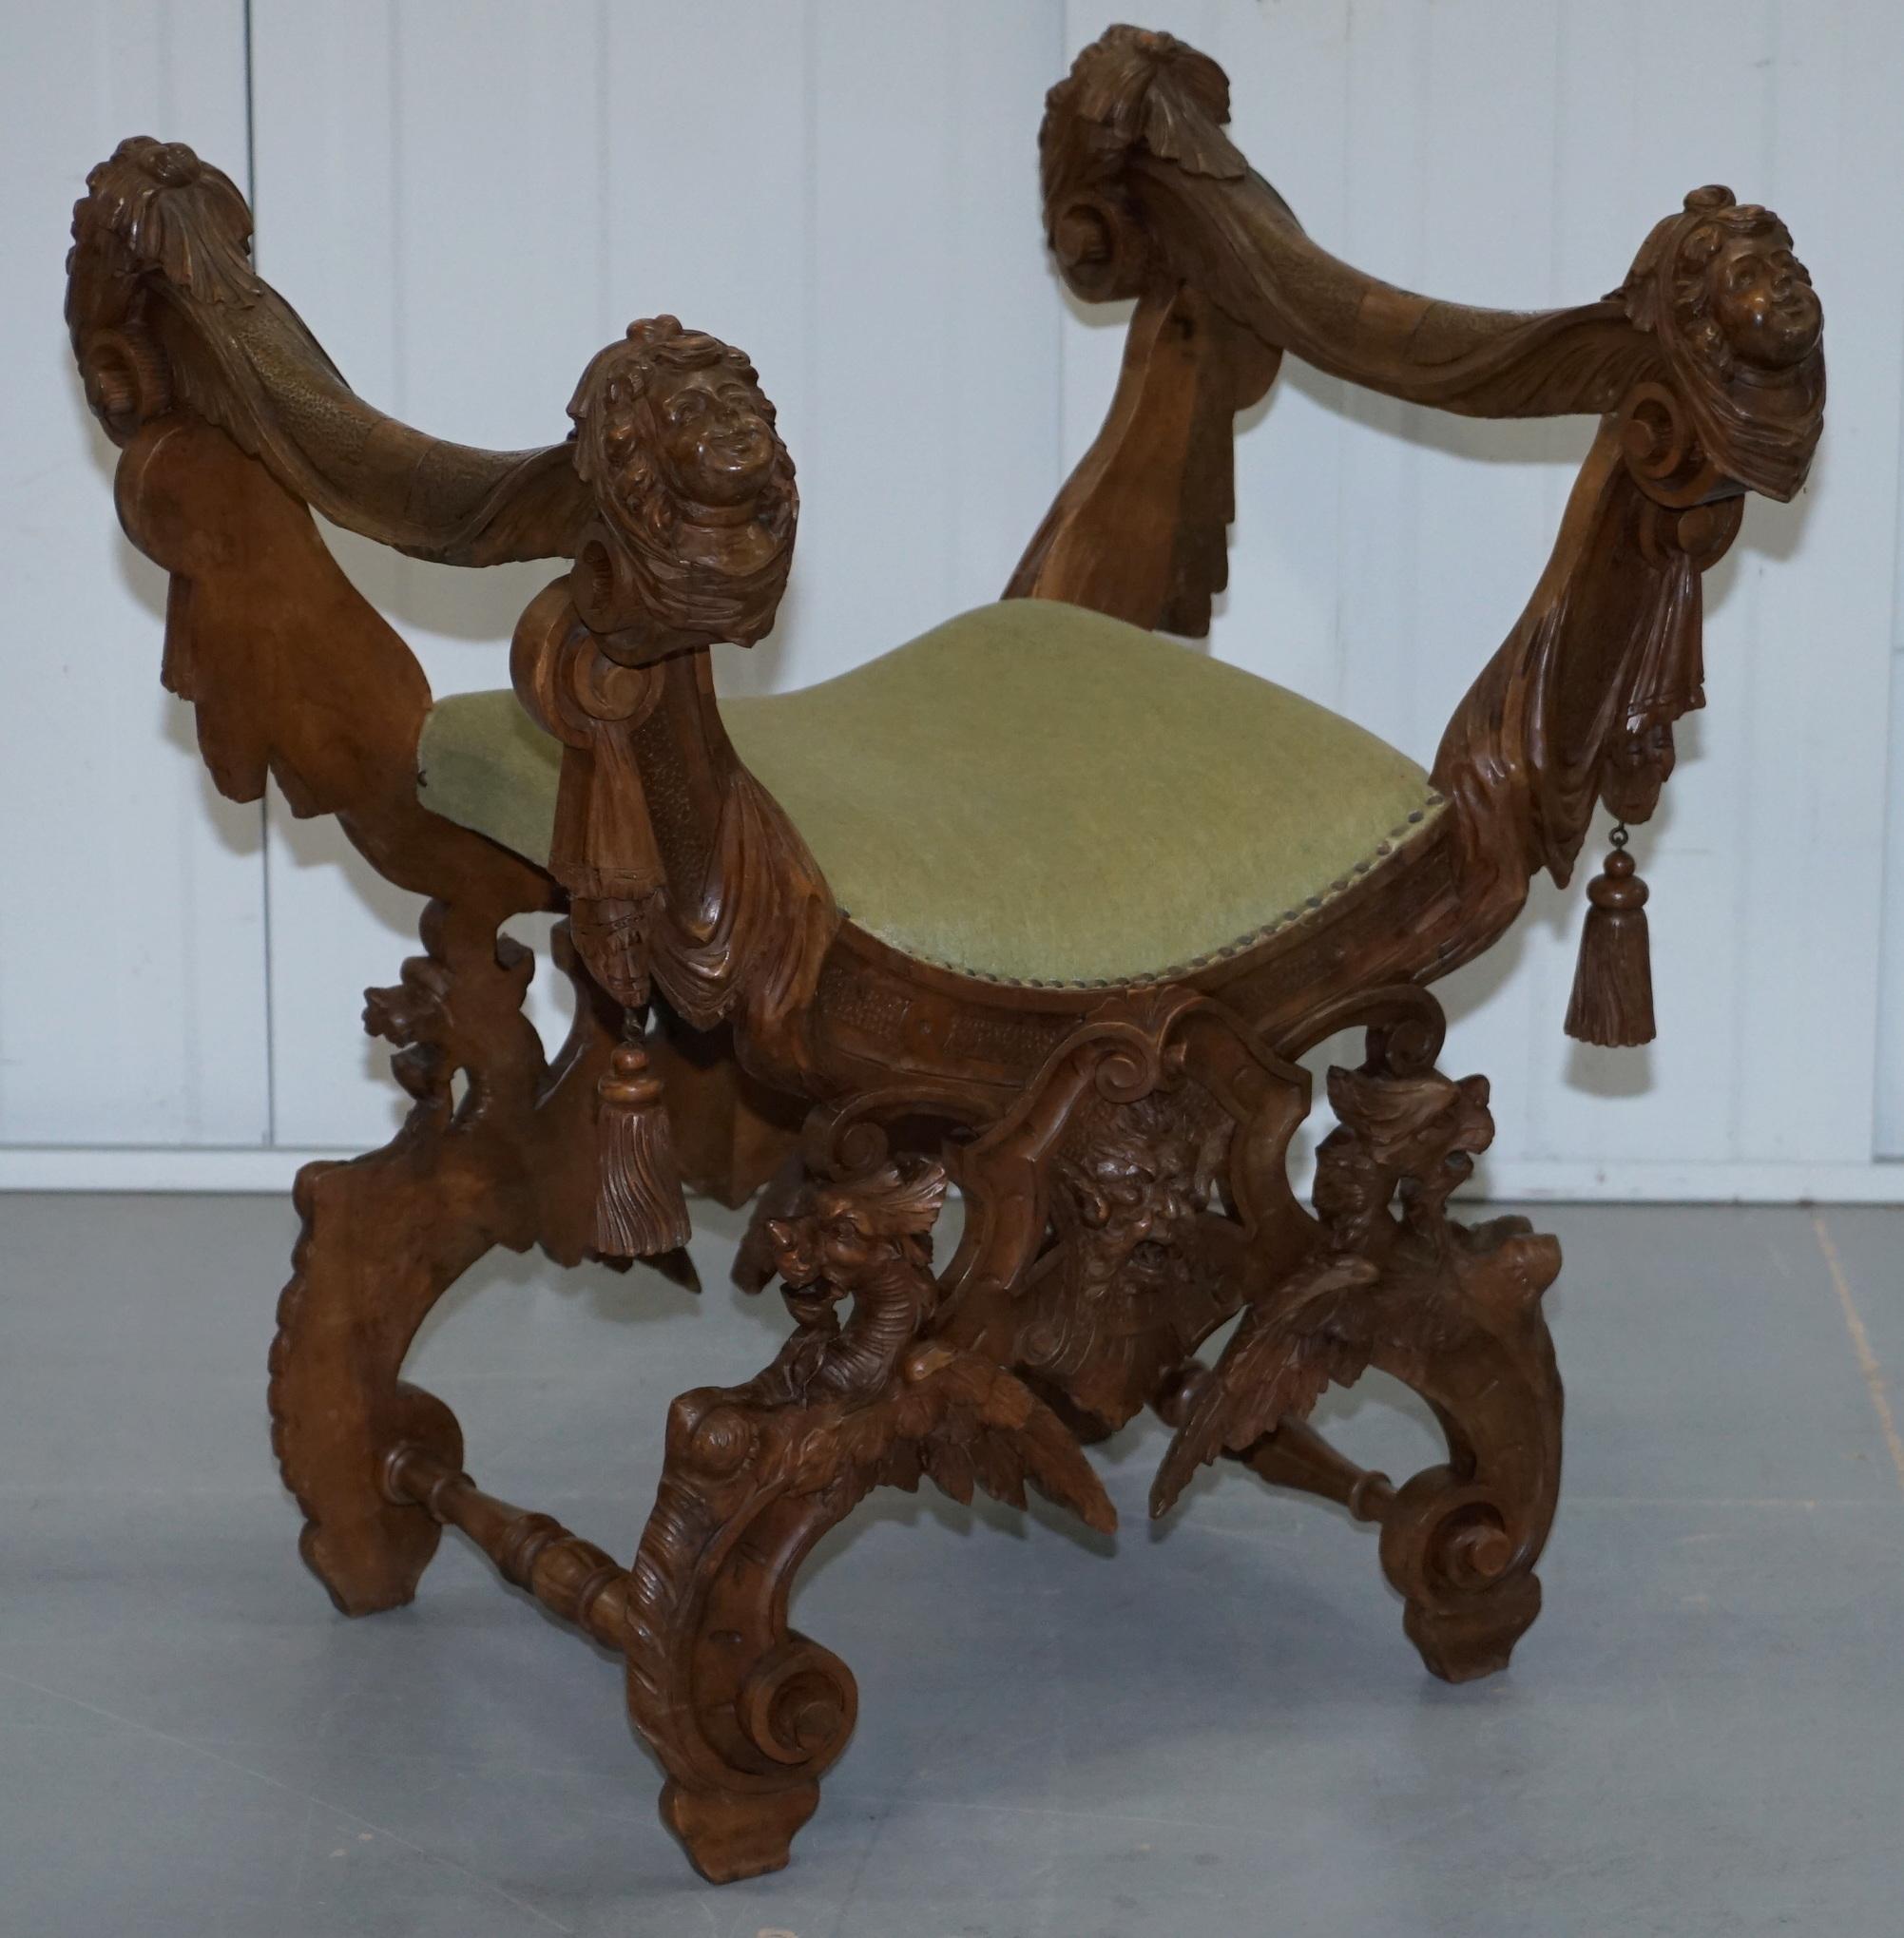 We are delighted to this stunning Italian Renaissance revival hand carved from solid walnut with Cherubs and Dragons bench seat

Please note the delivery fee listed is just a guide

A very good looking and highly decorative chair, I’ve never